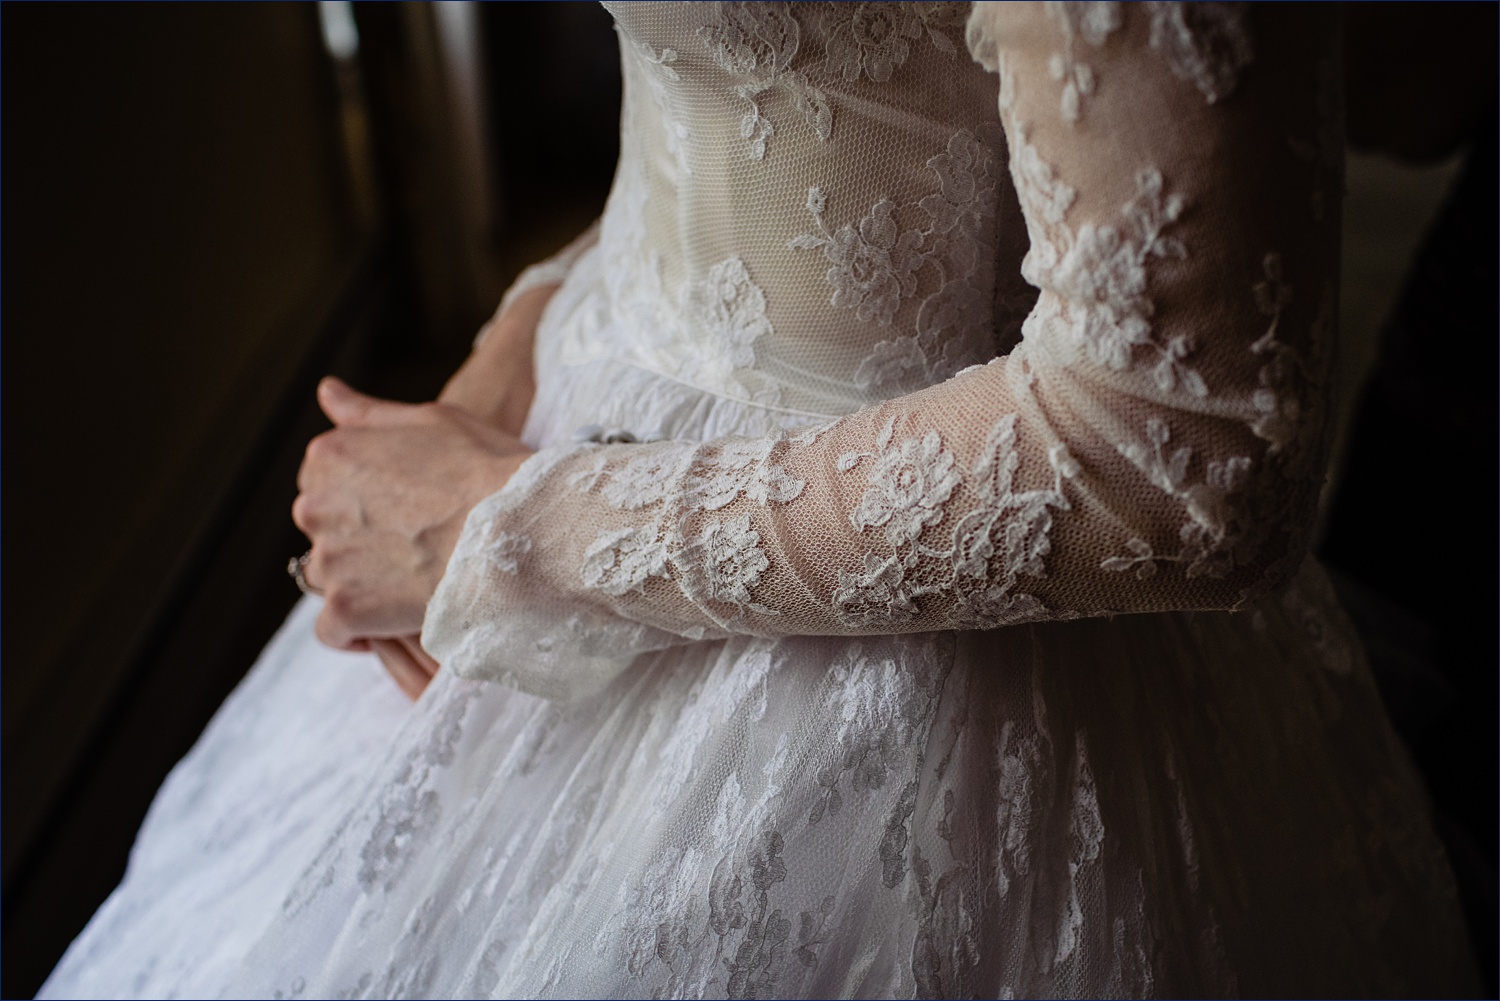 The bride's lace wedding dress sleeve 